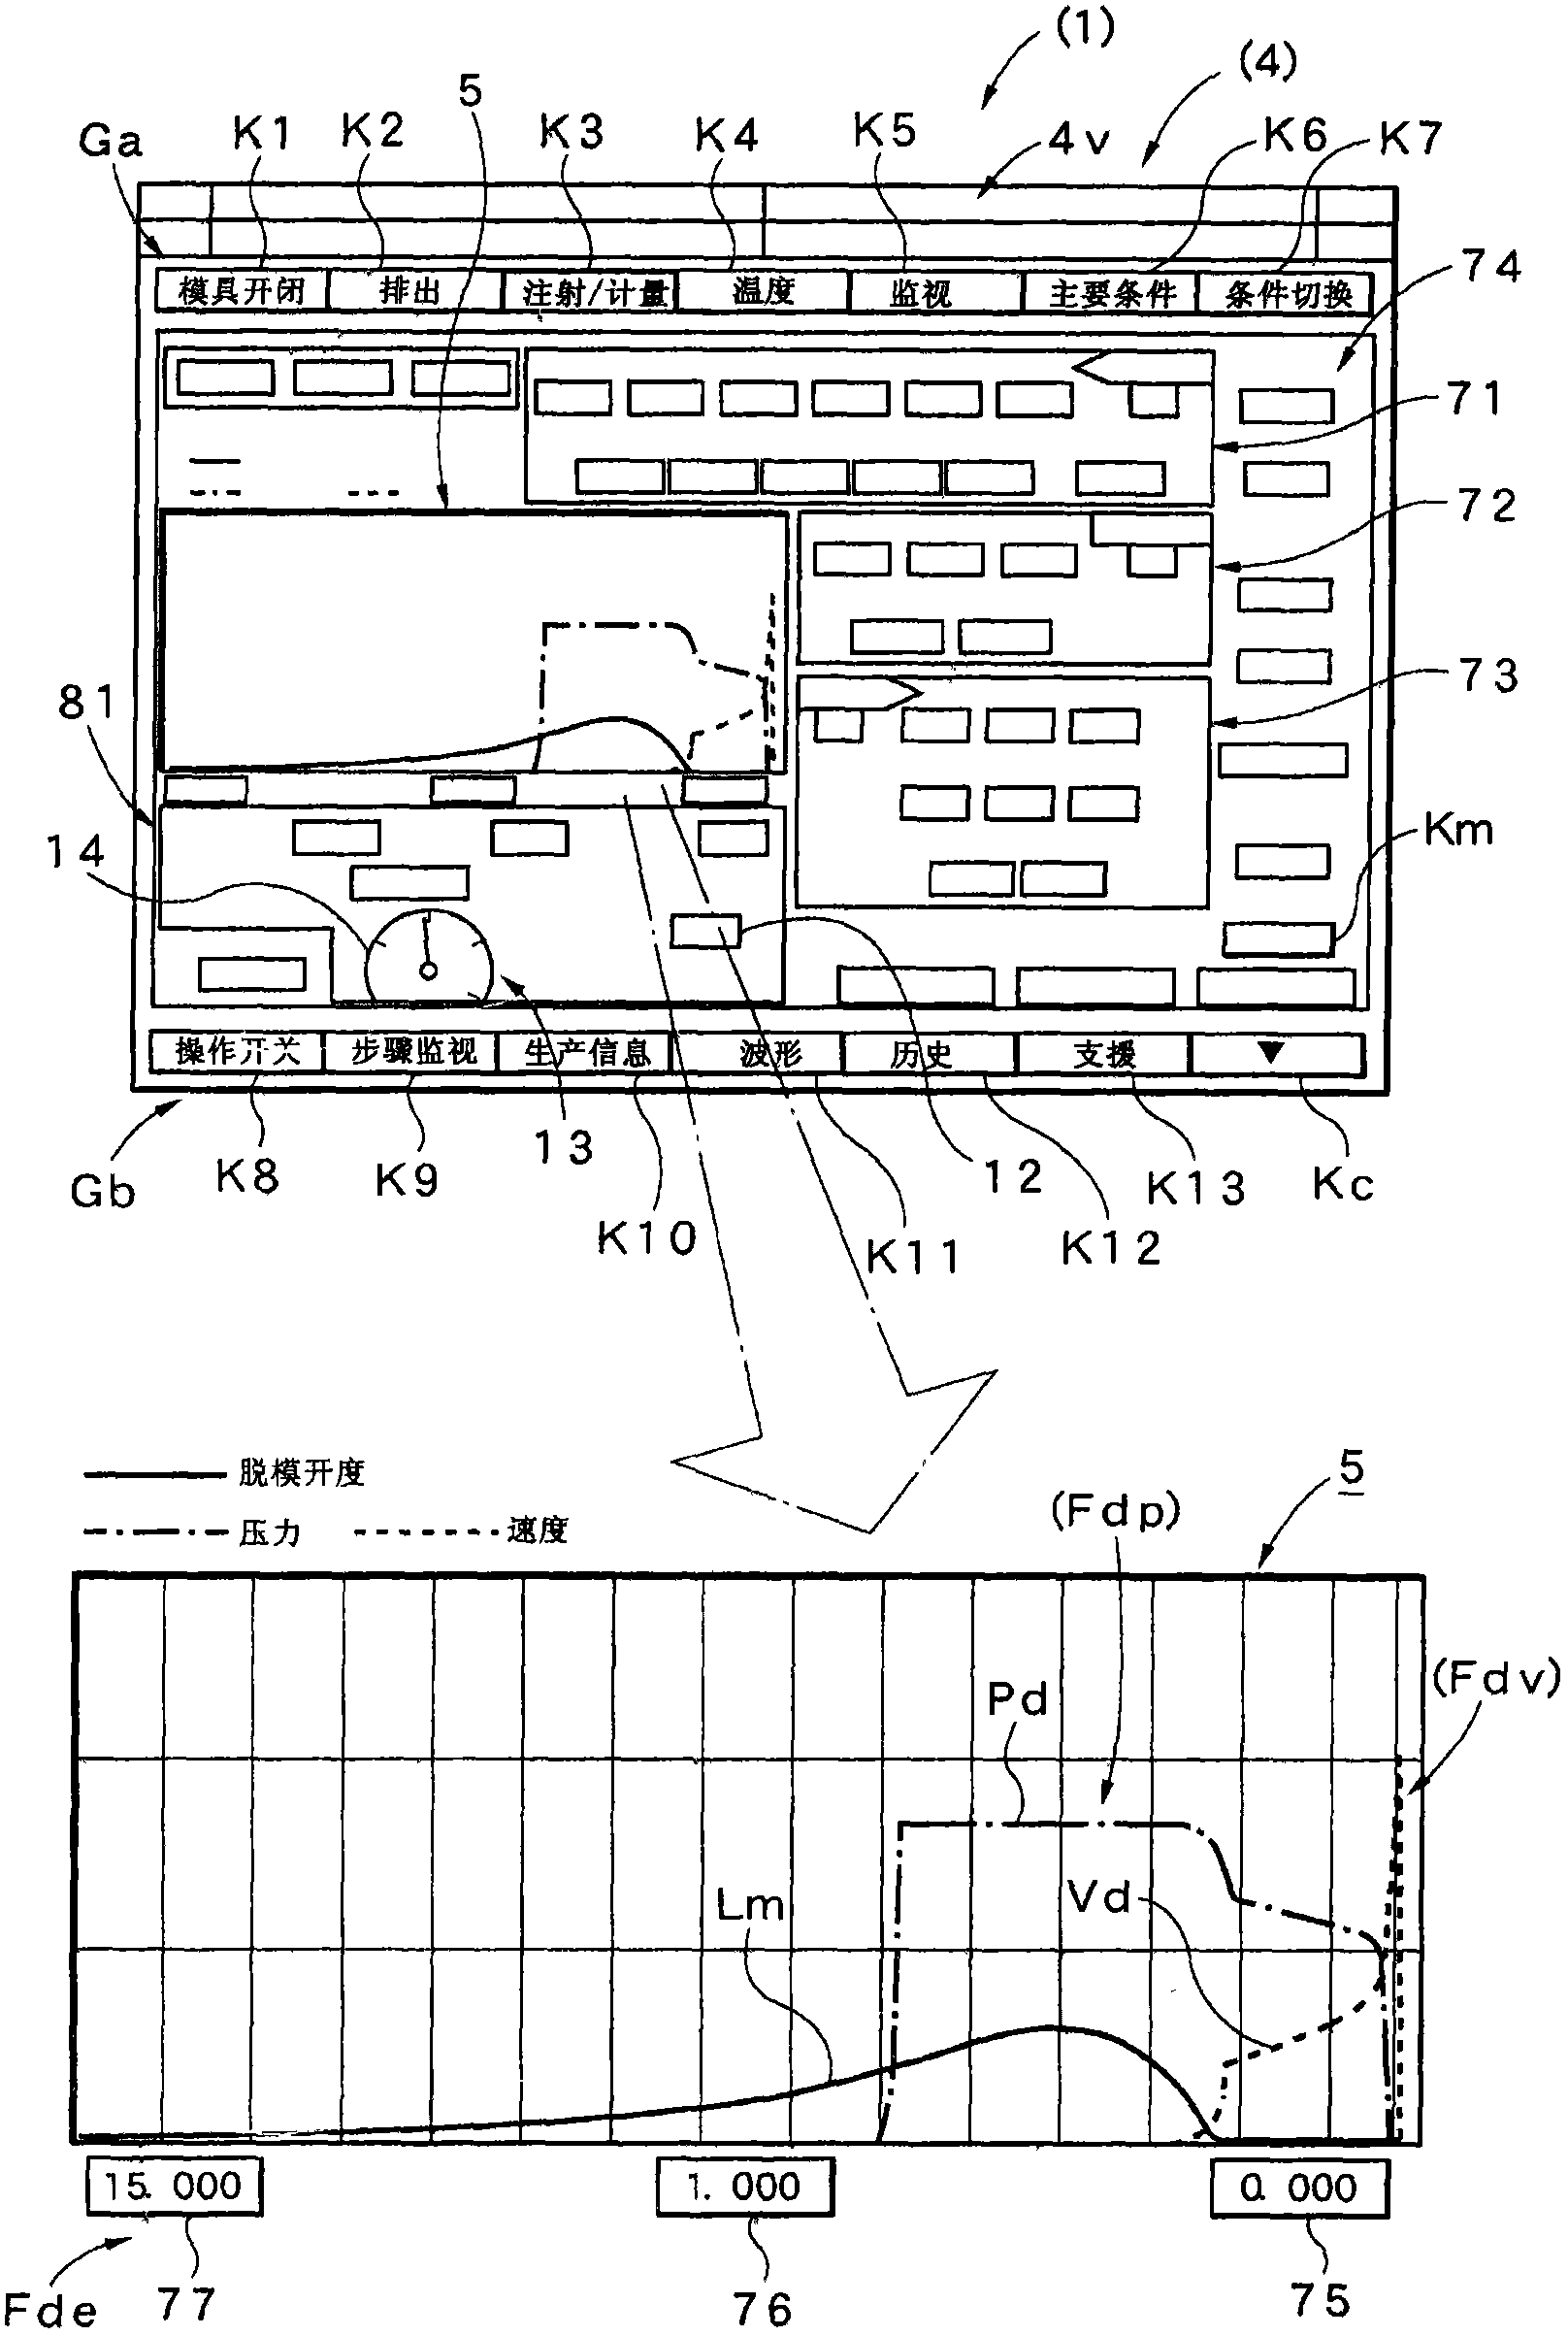 Waveform monitor apparatus of injection molding machine